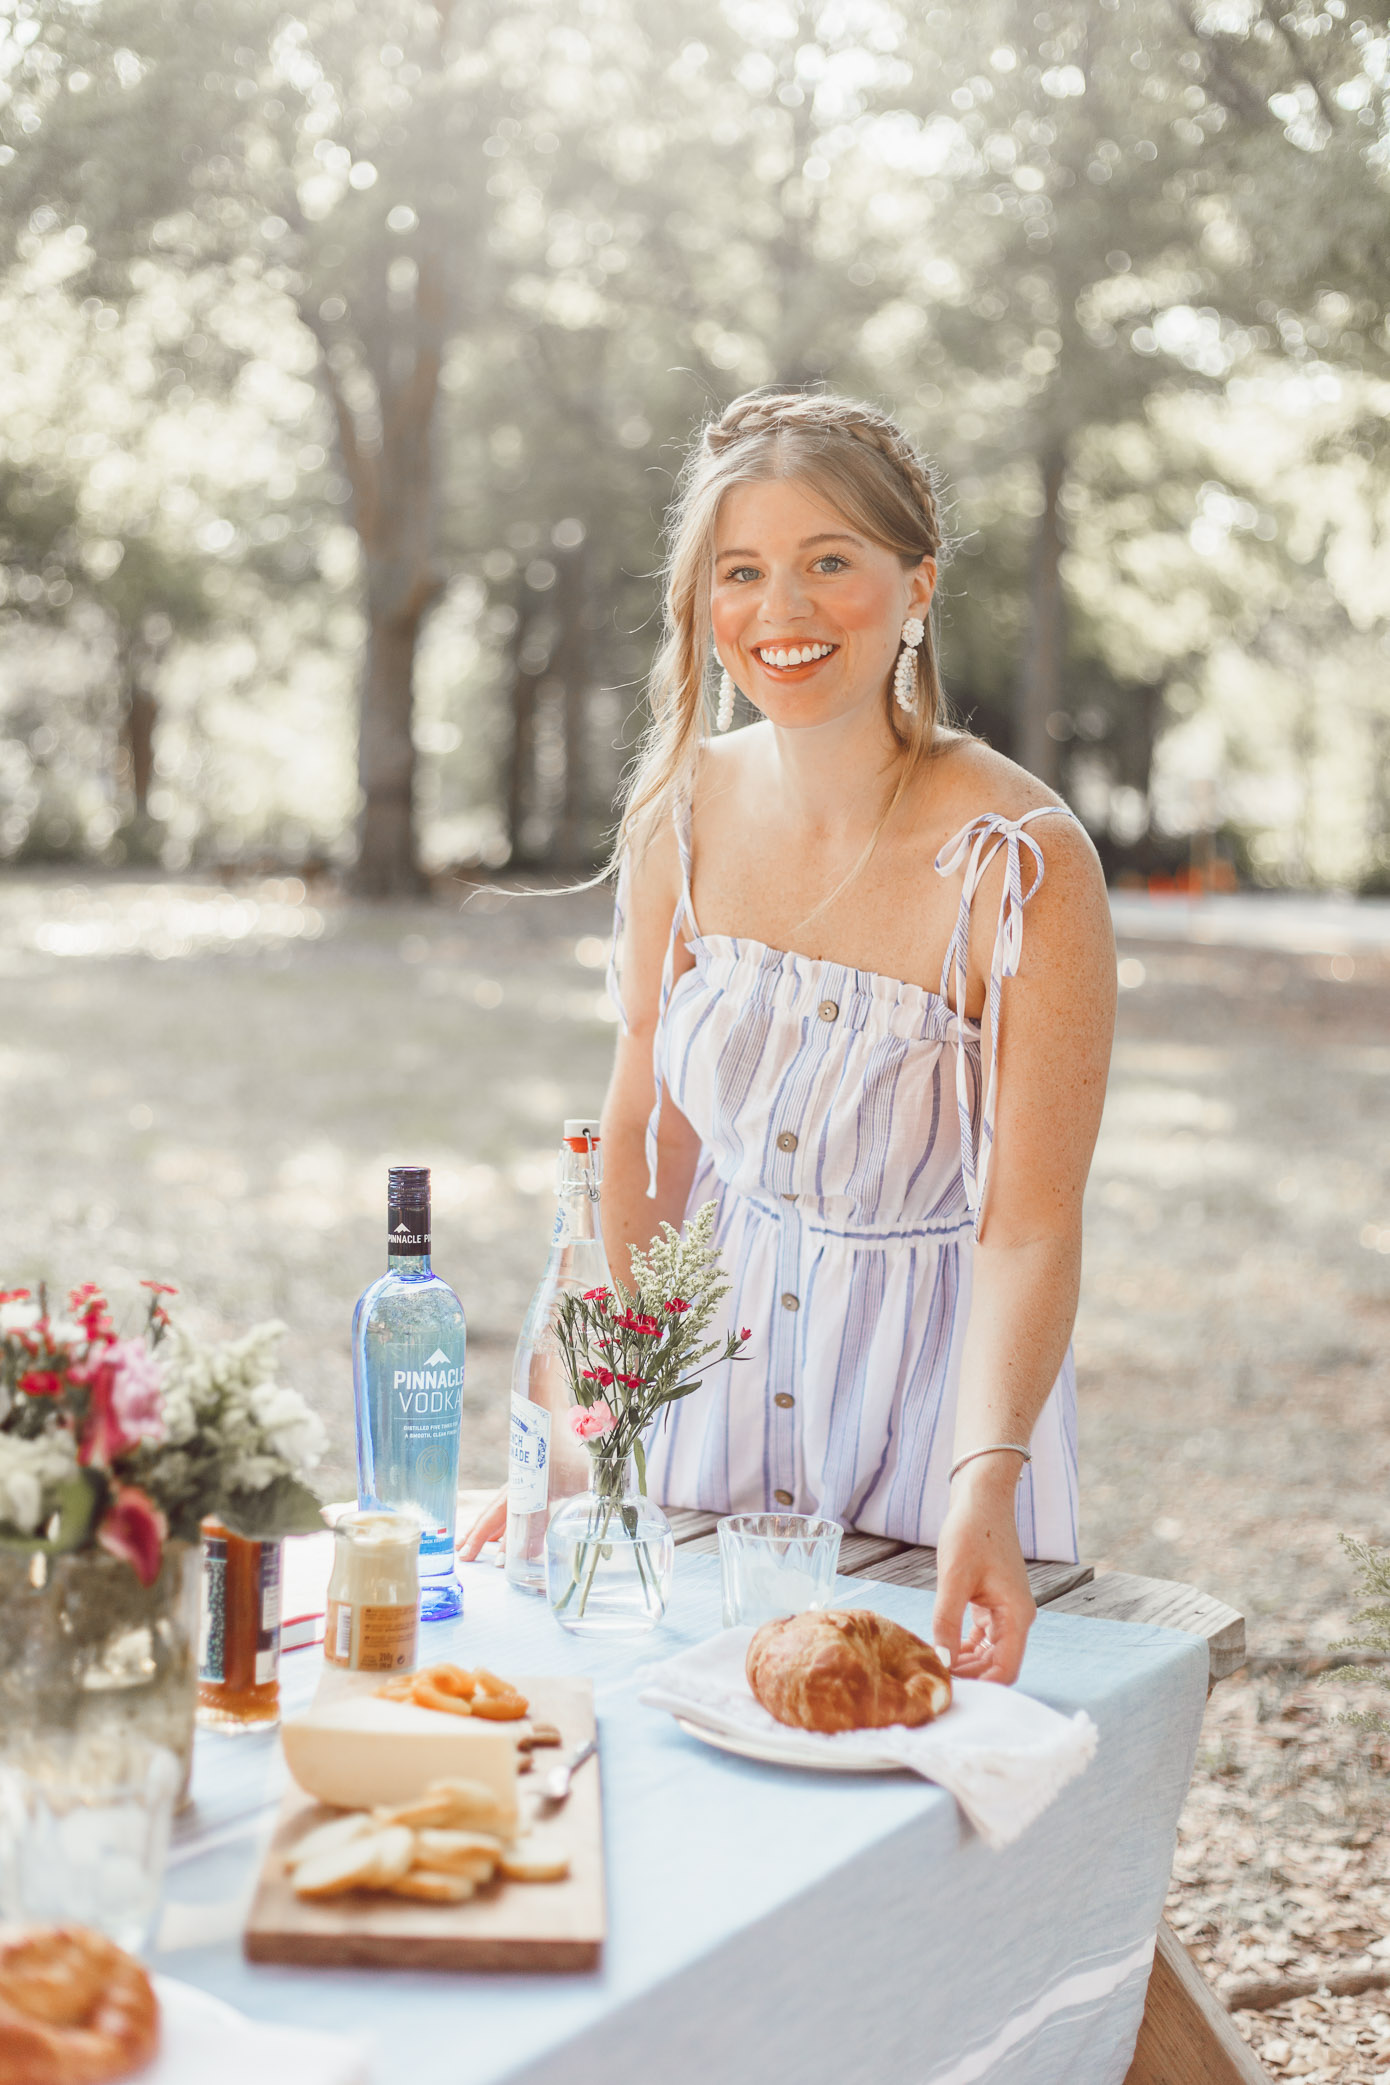 A French Inspired Picnic by popular Charlotte style blogger Louella Reese